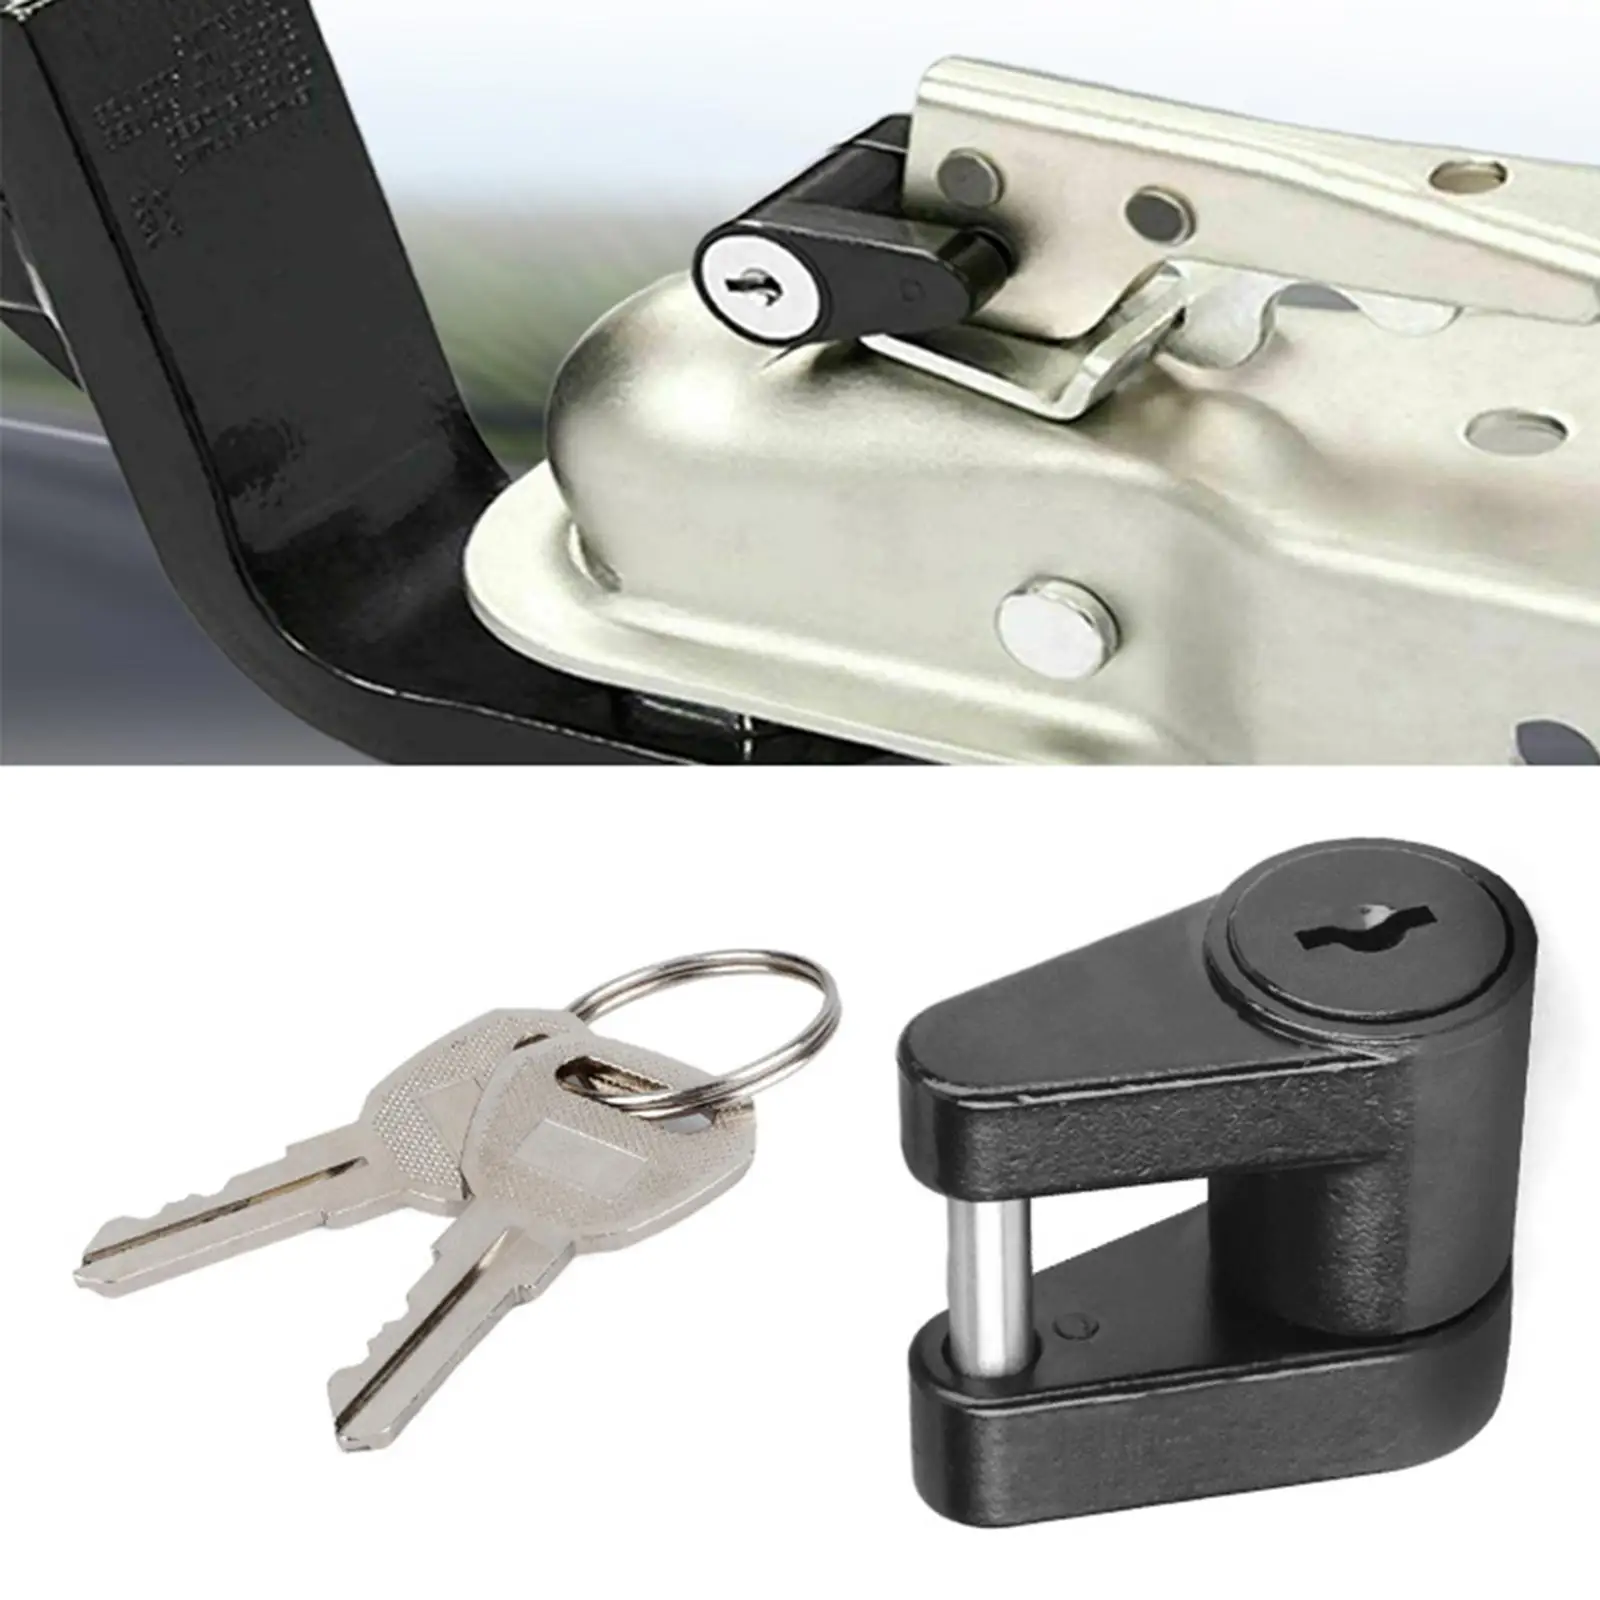 Trailer Coupler Lock with 2 Keys 1/4 inch pin 3/4 inch Span for Car`S Coupler RV Tow Boat Truck Trailers